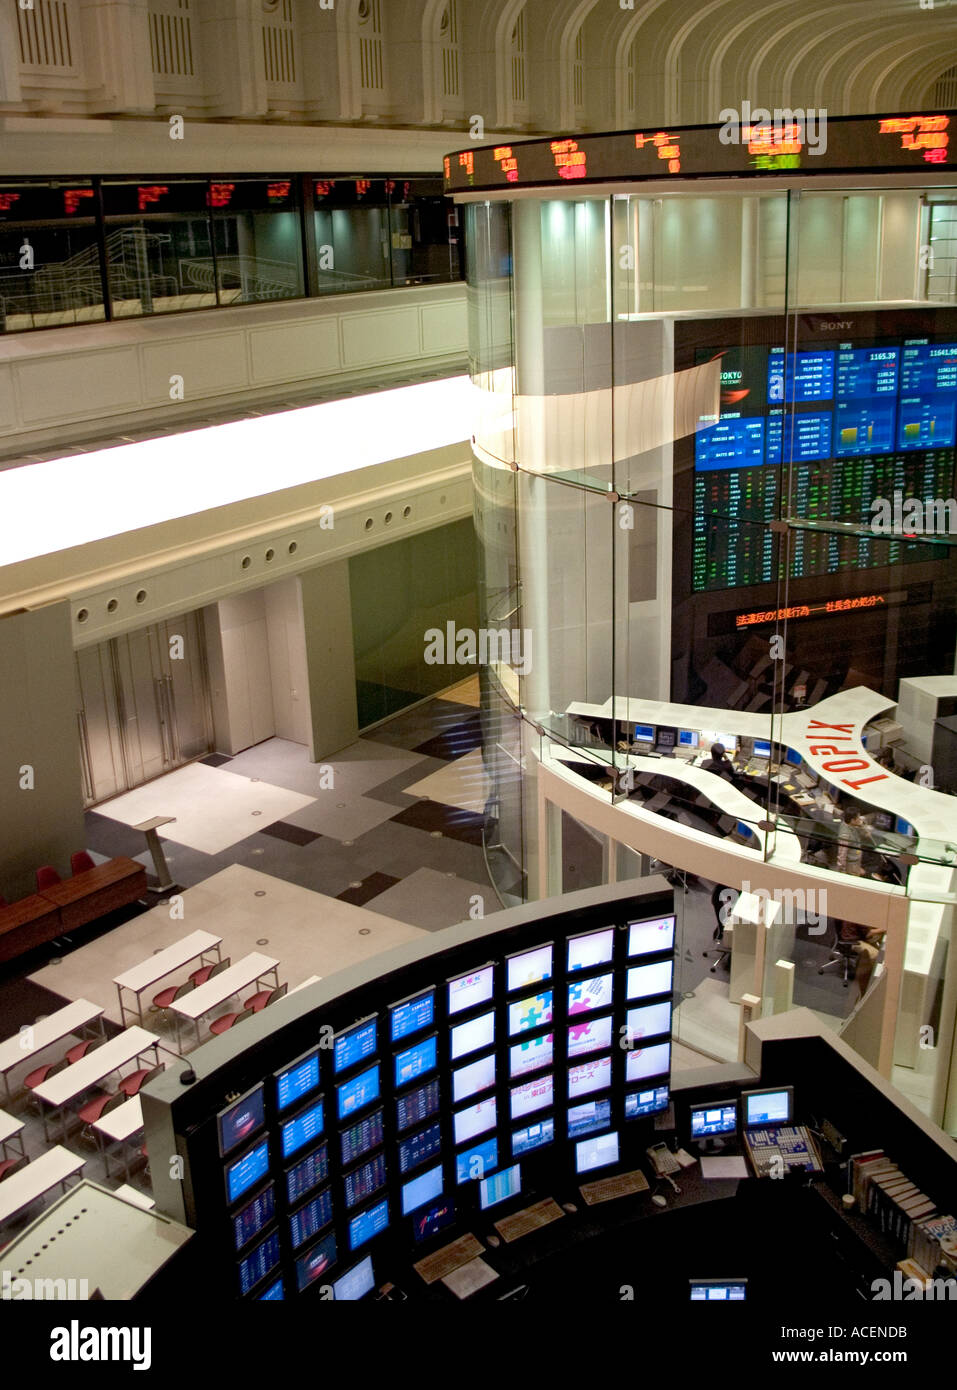 Interior view of the Topix Tokyo Stock Exchange the largest financial market in Japan Stock Photo